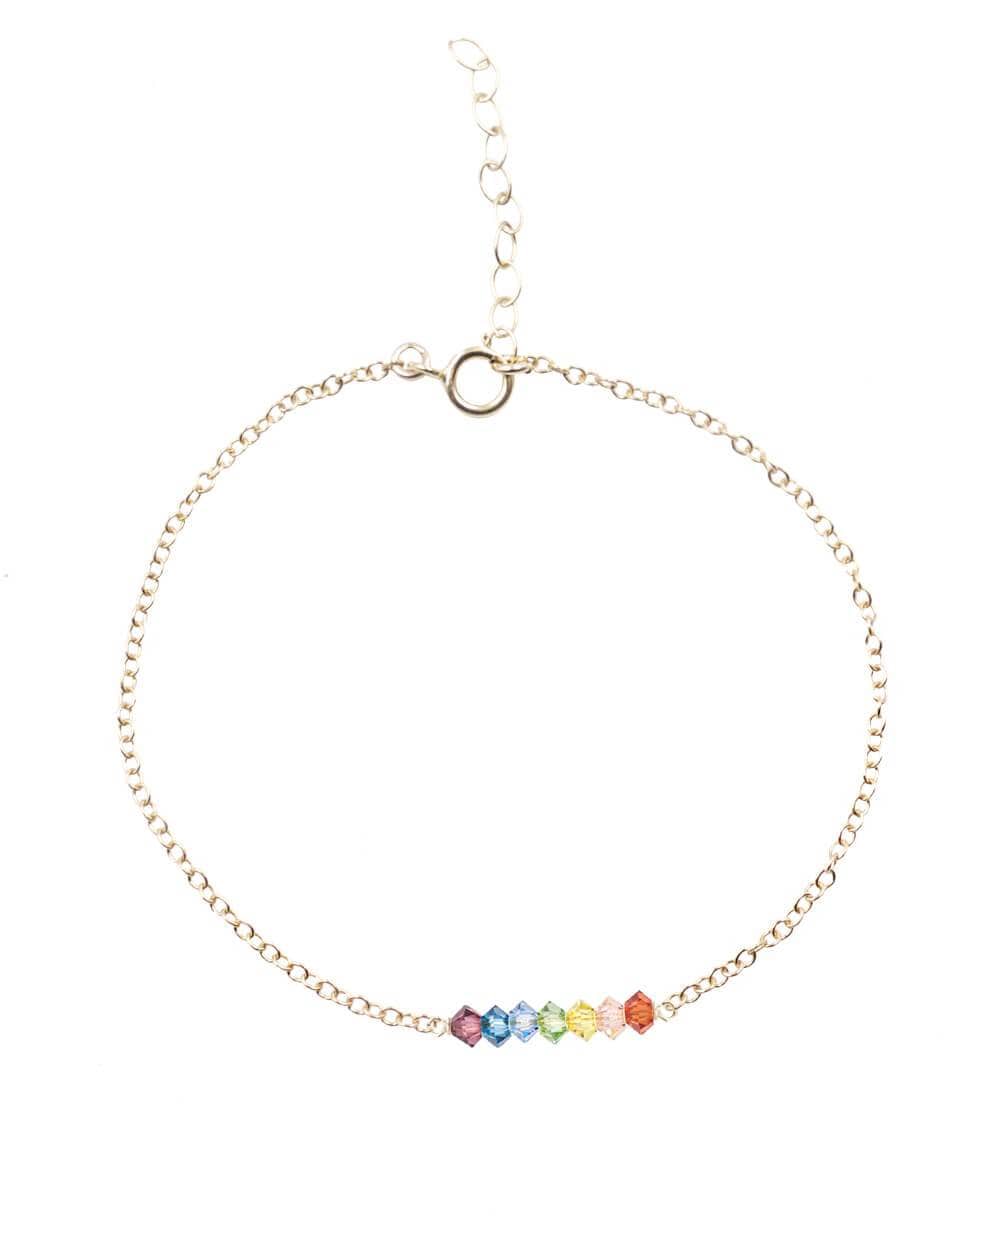 Detail view of The 7 Chakras Bracelet on a 14k Gold Filled Chain with 7 Swarovski Crystals created by MaeMae Jewelry